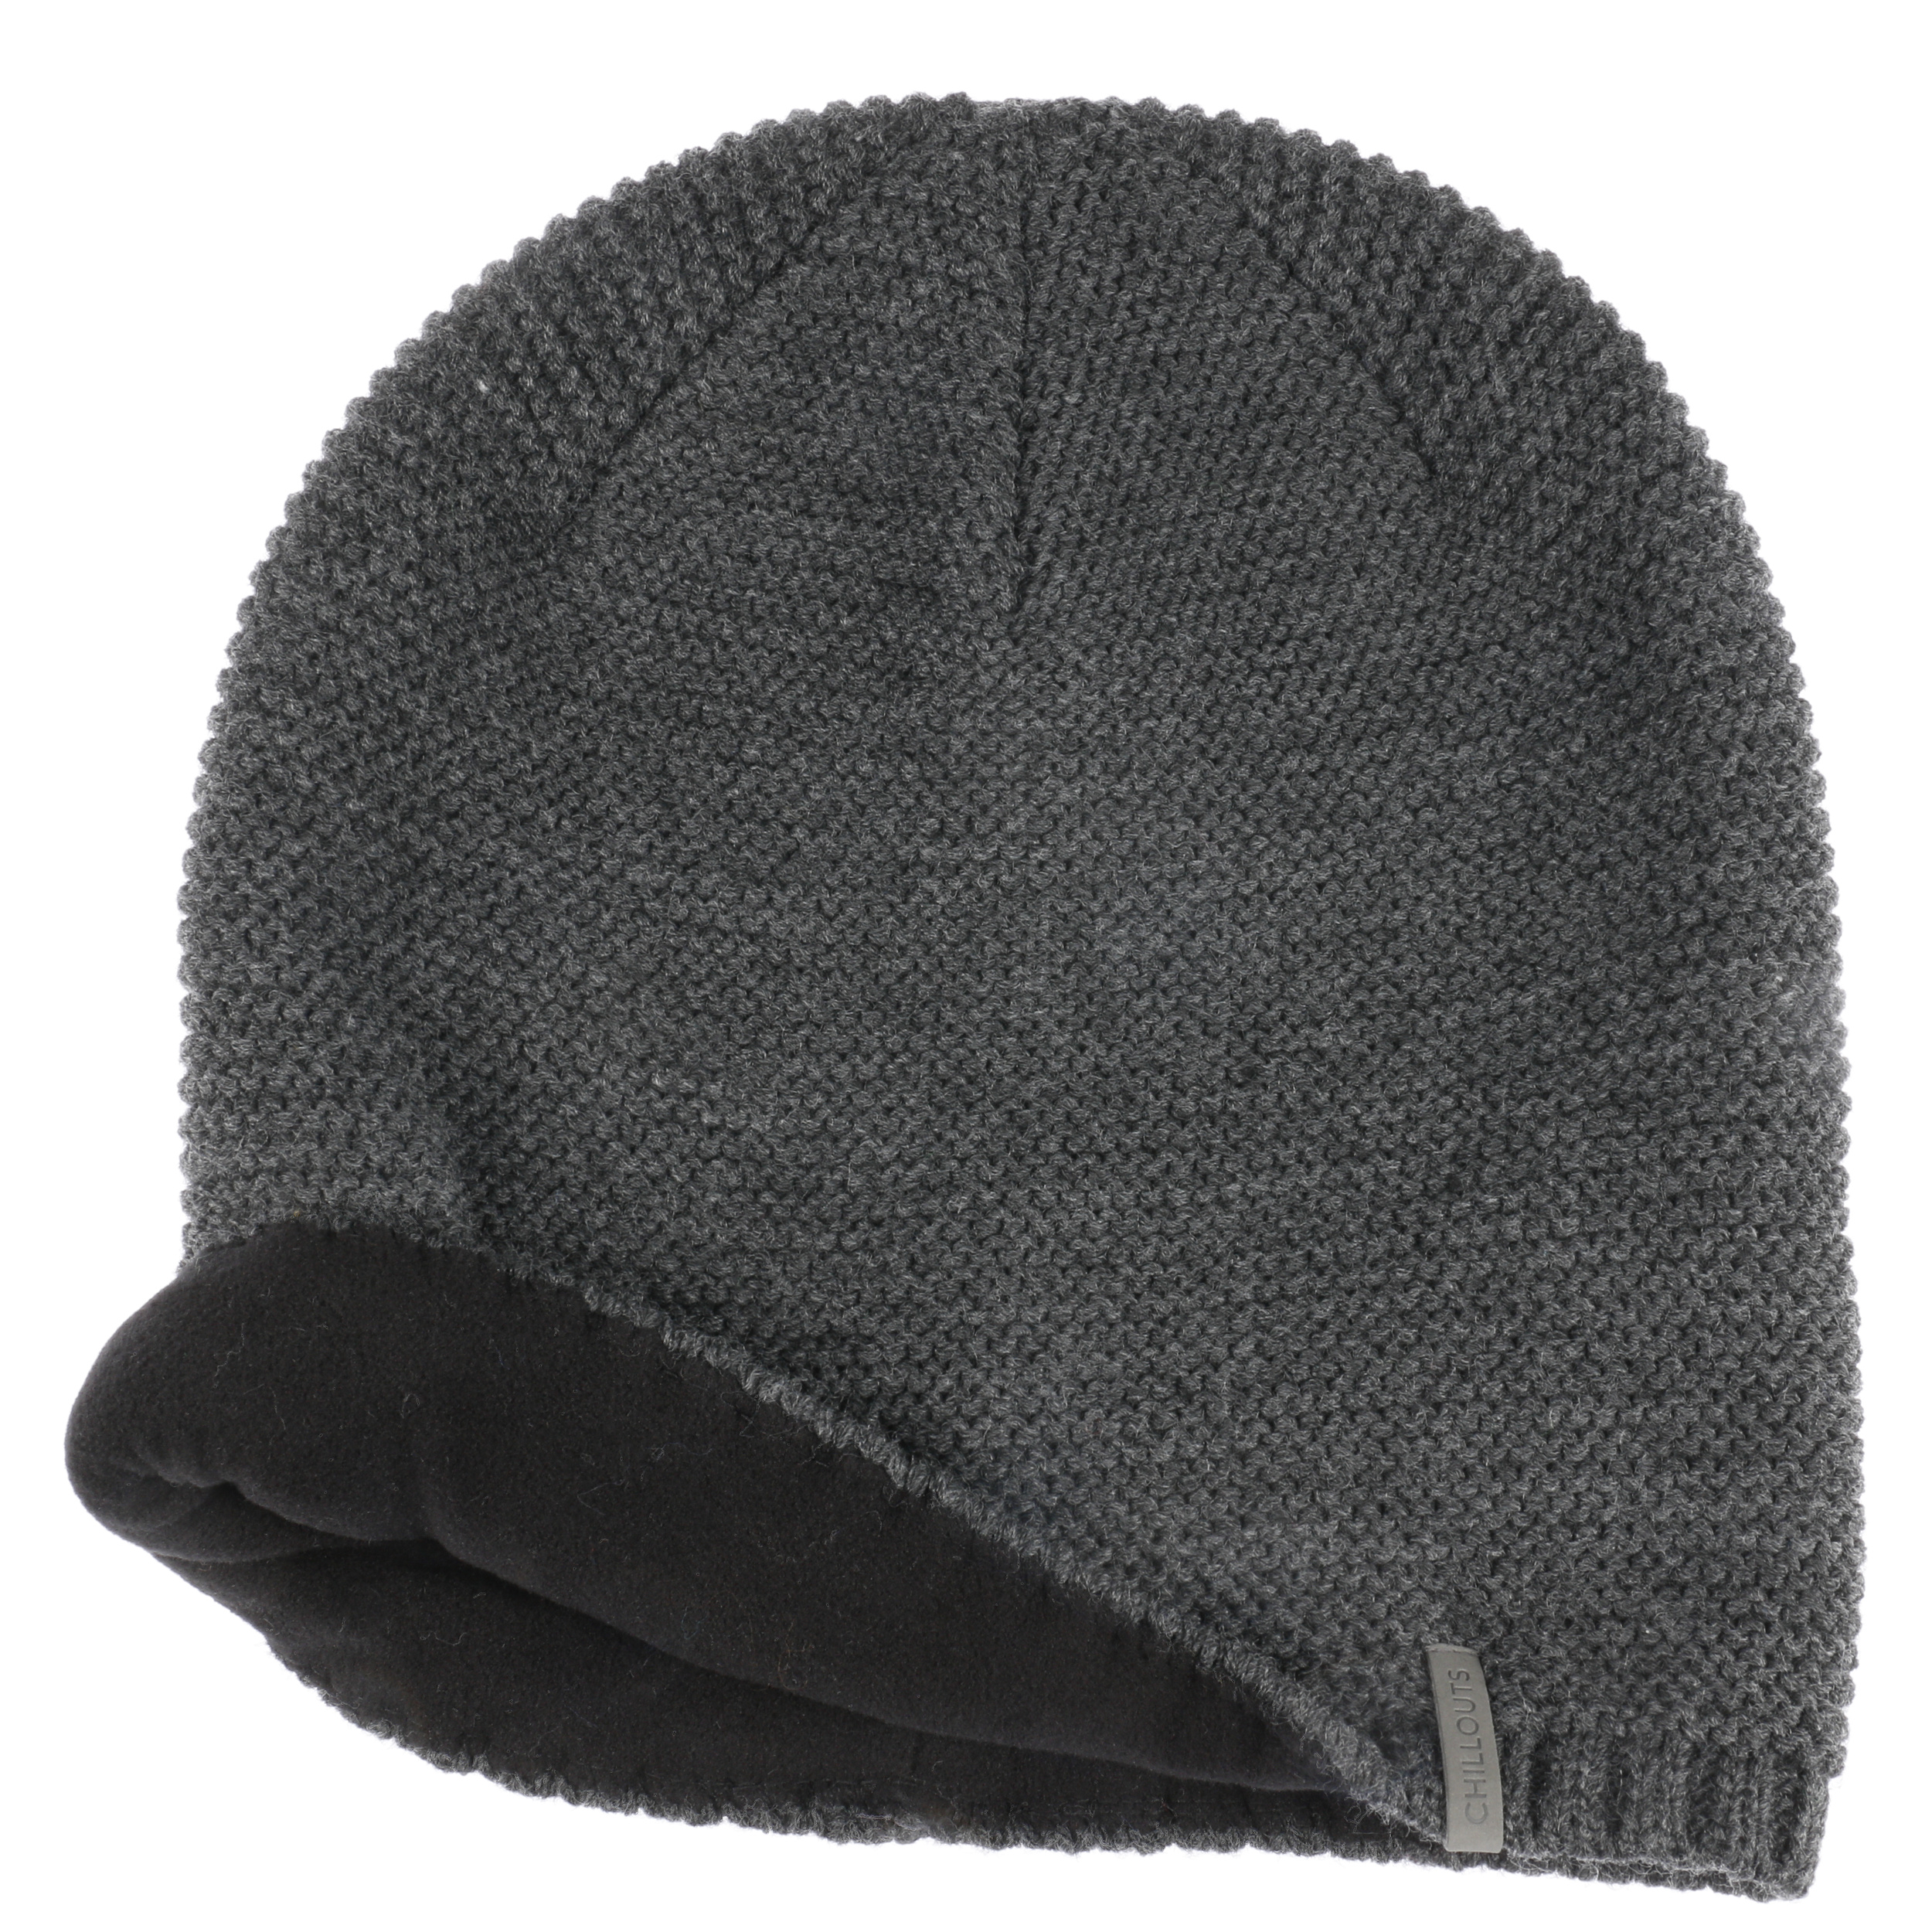 Keith Beanie by 34,99 Chillouts - €